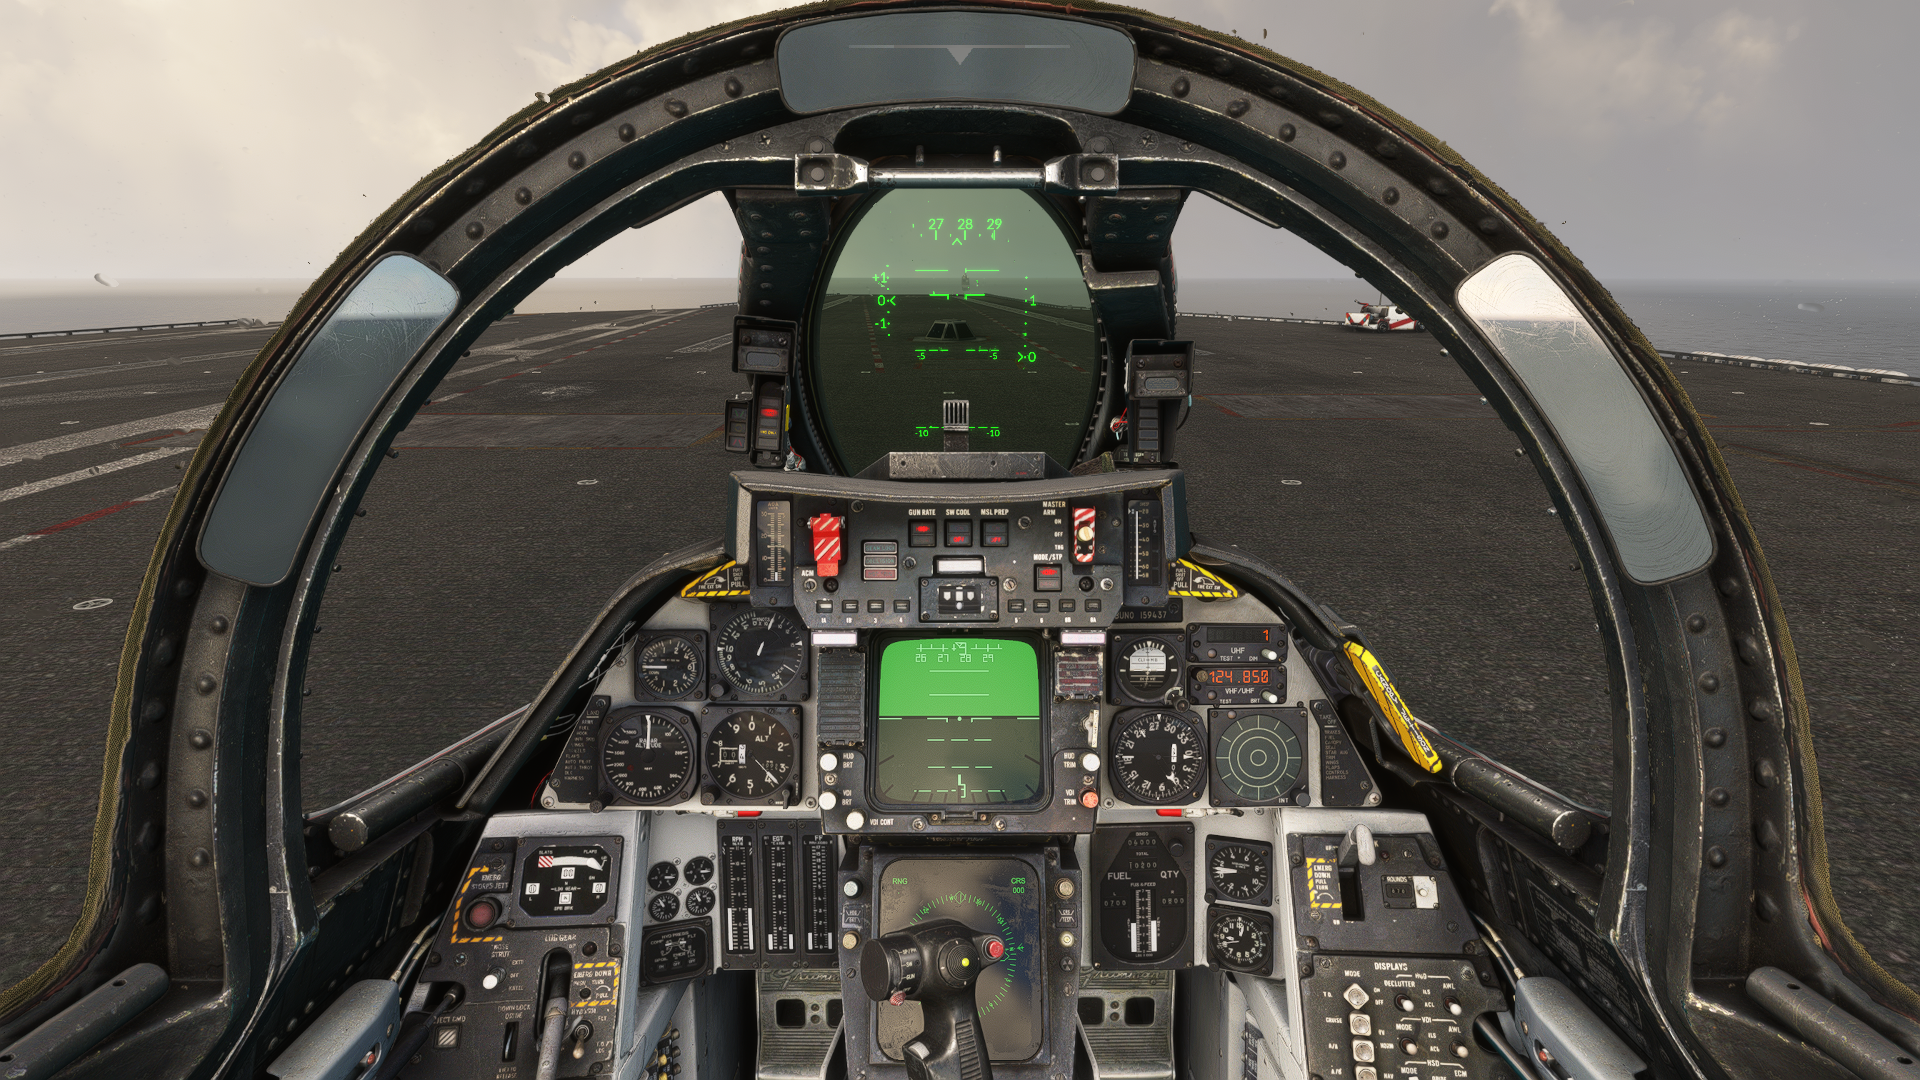 REVIEW: Heatblur/IndiaFoxtEcho F-14 - Not What I Expected - IndiaFoxtEcho